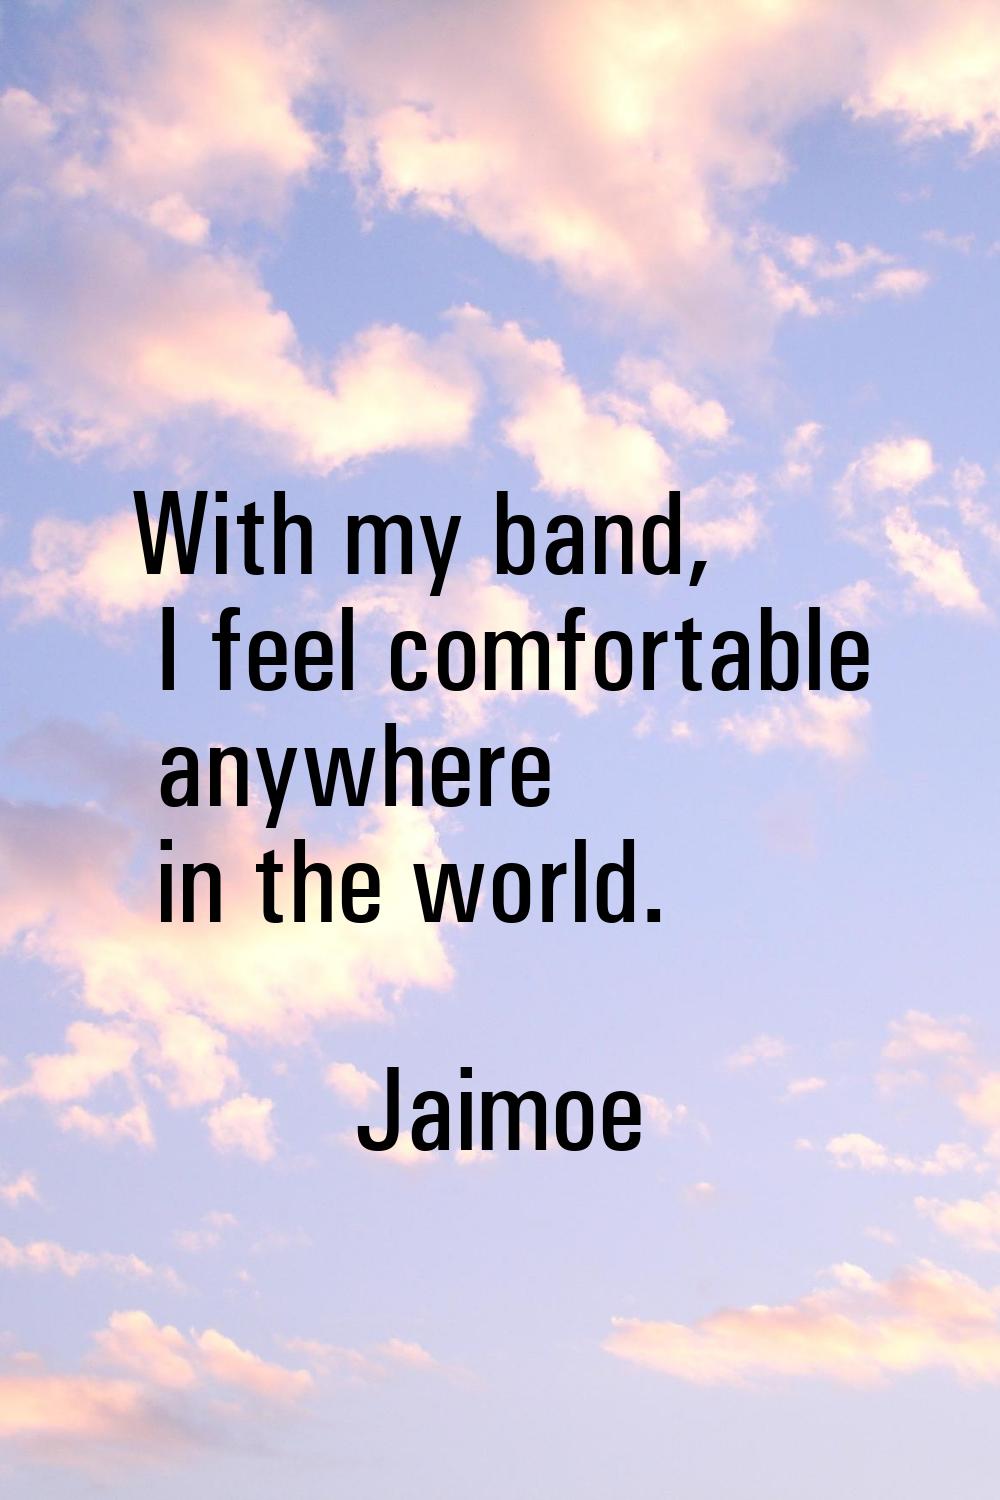 With my band, I feel comfortable anywhere in the world.